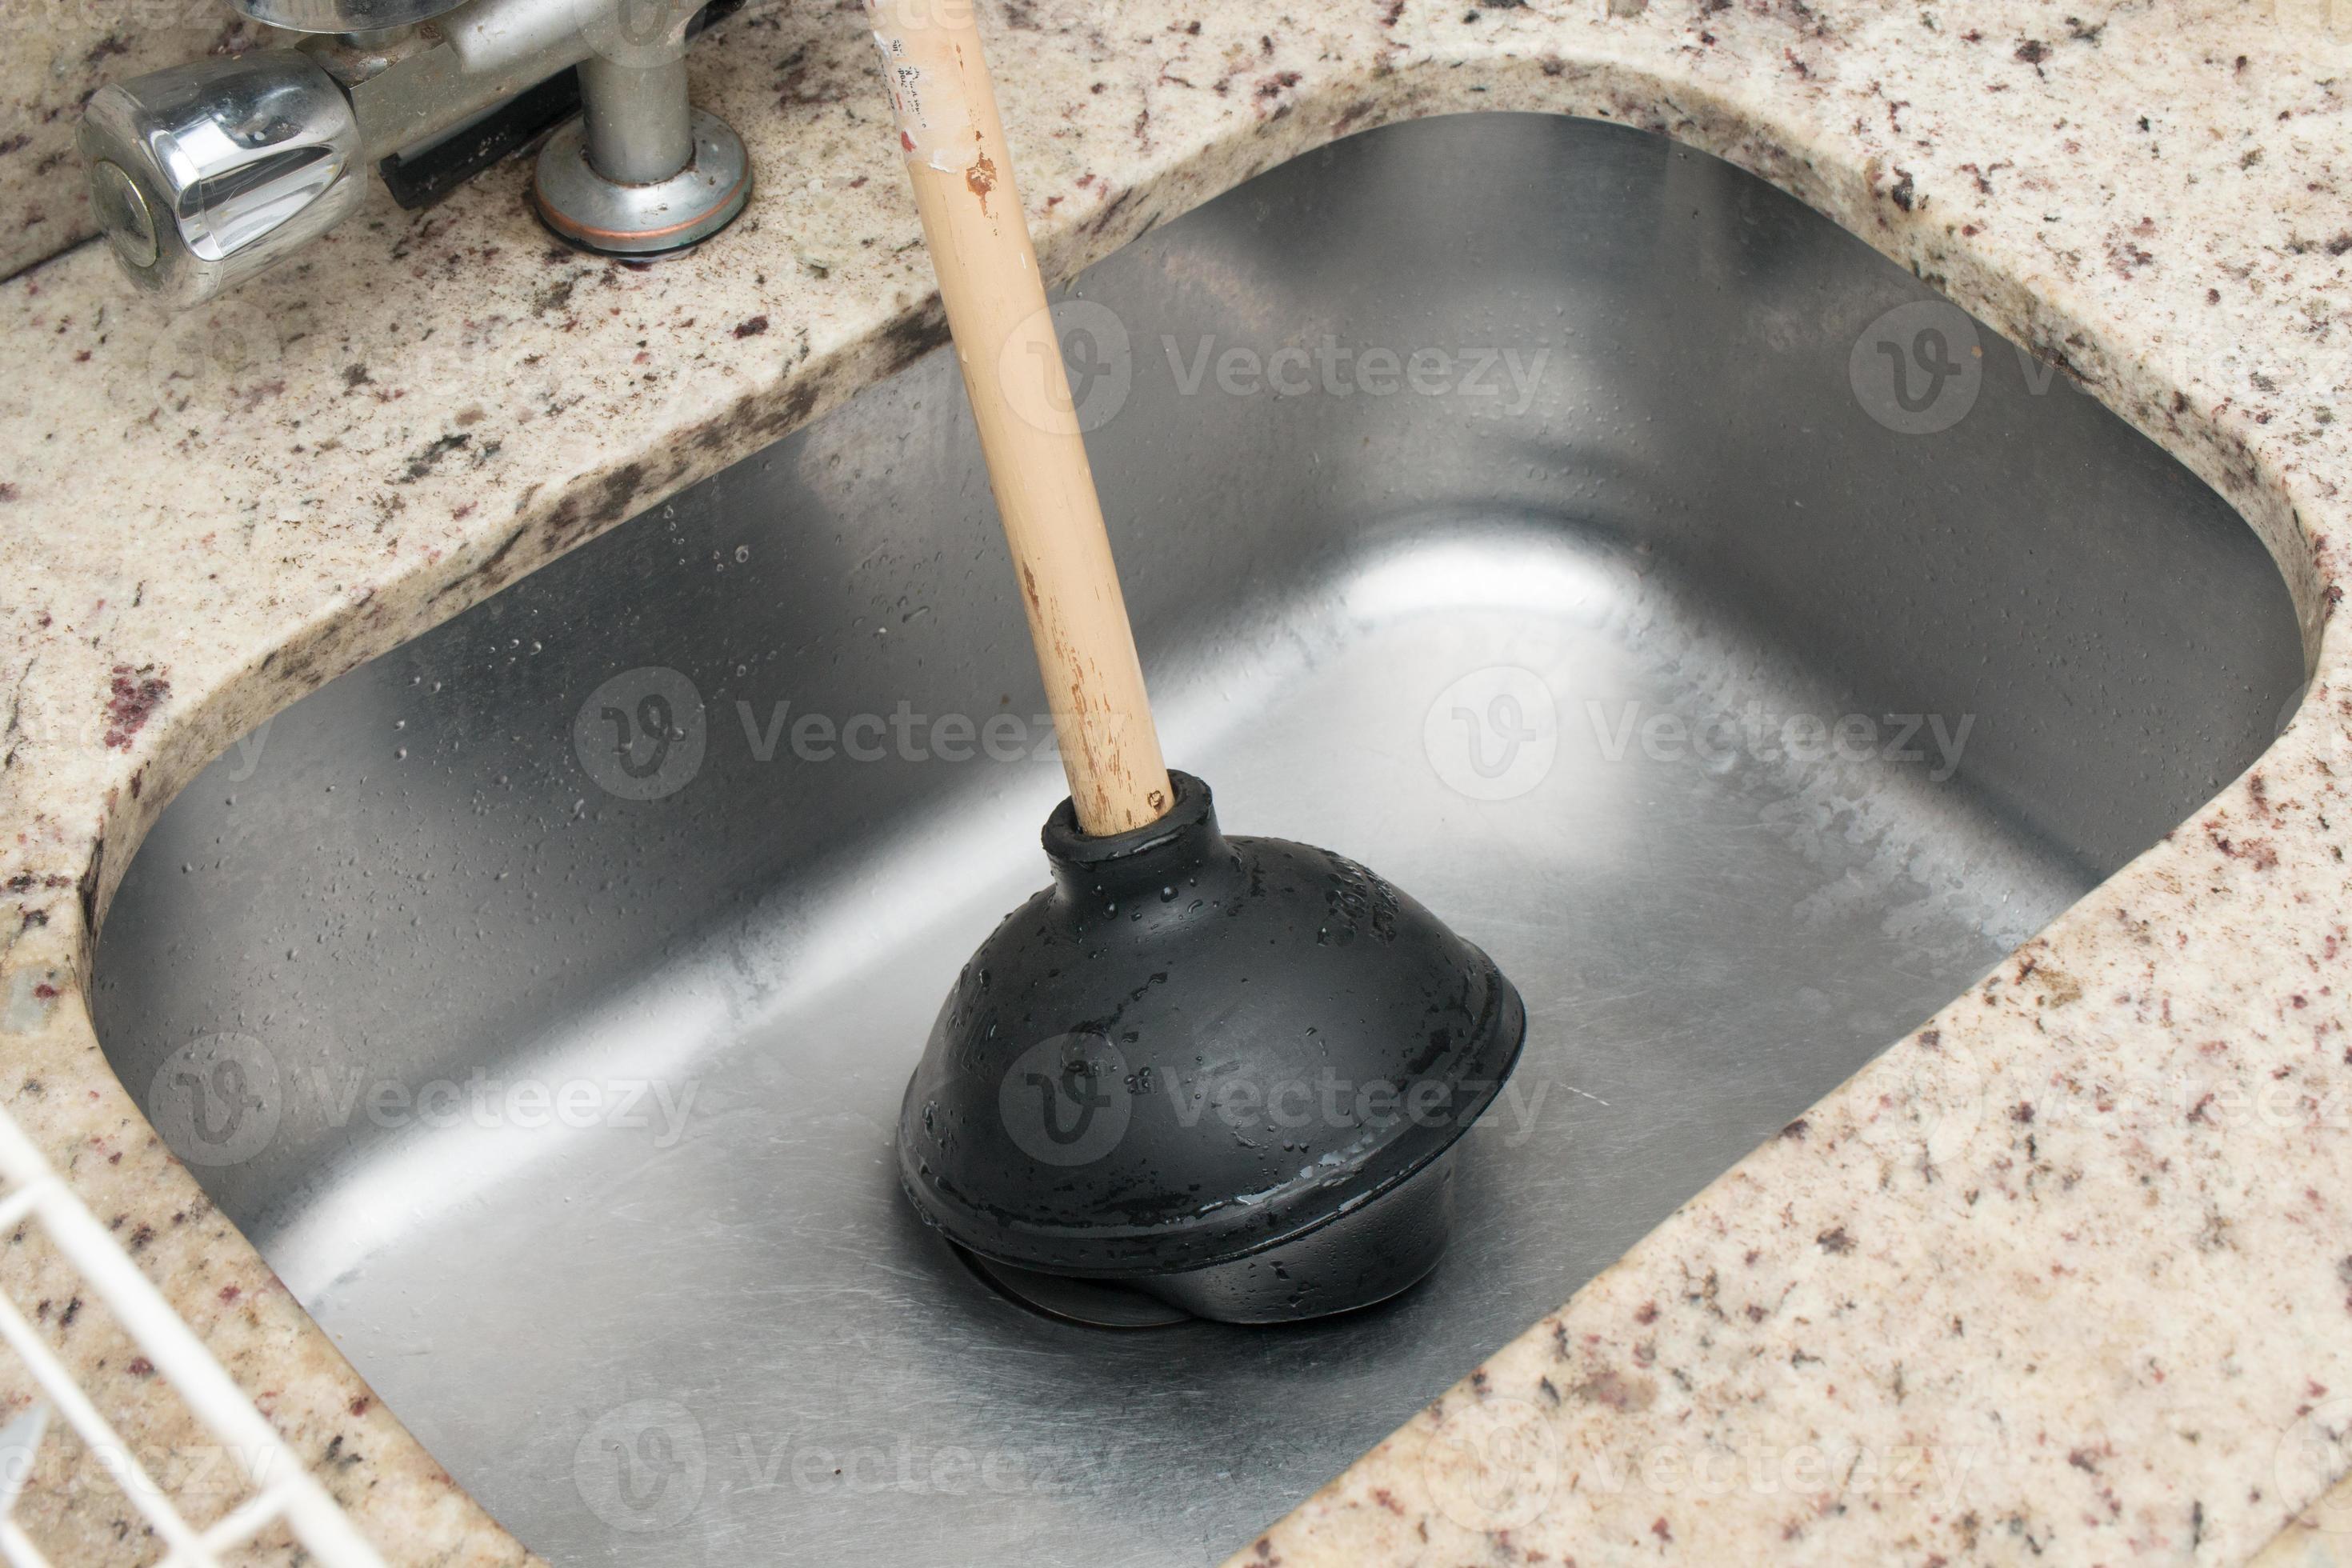 https://static.vecteezy.com/system/resources/previews/004/773/754/large_2x/man-using-a-plunger-to-unstop-his-kitchen-sink-photo.jpg